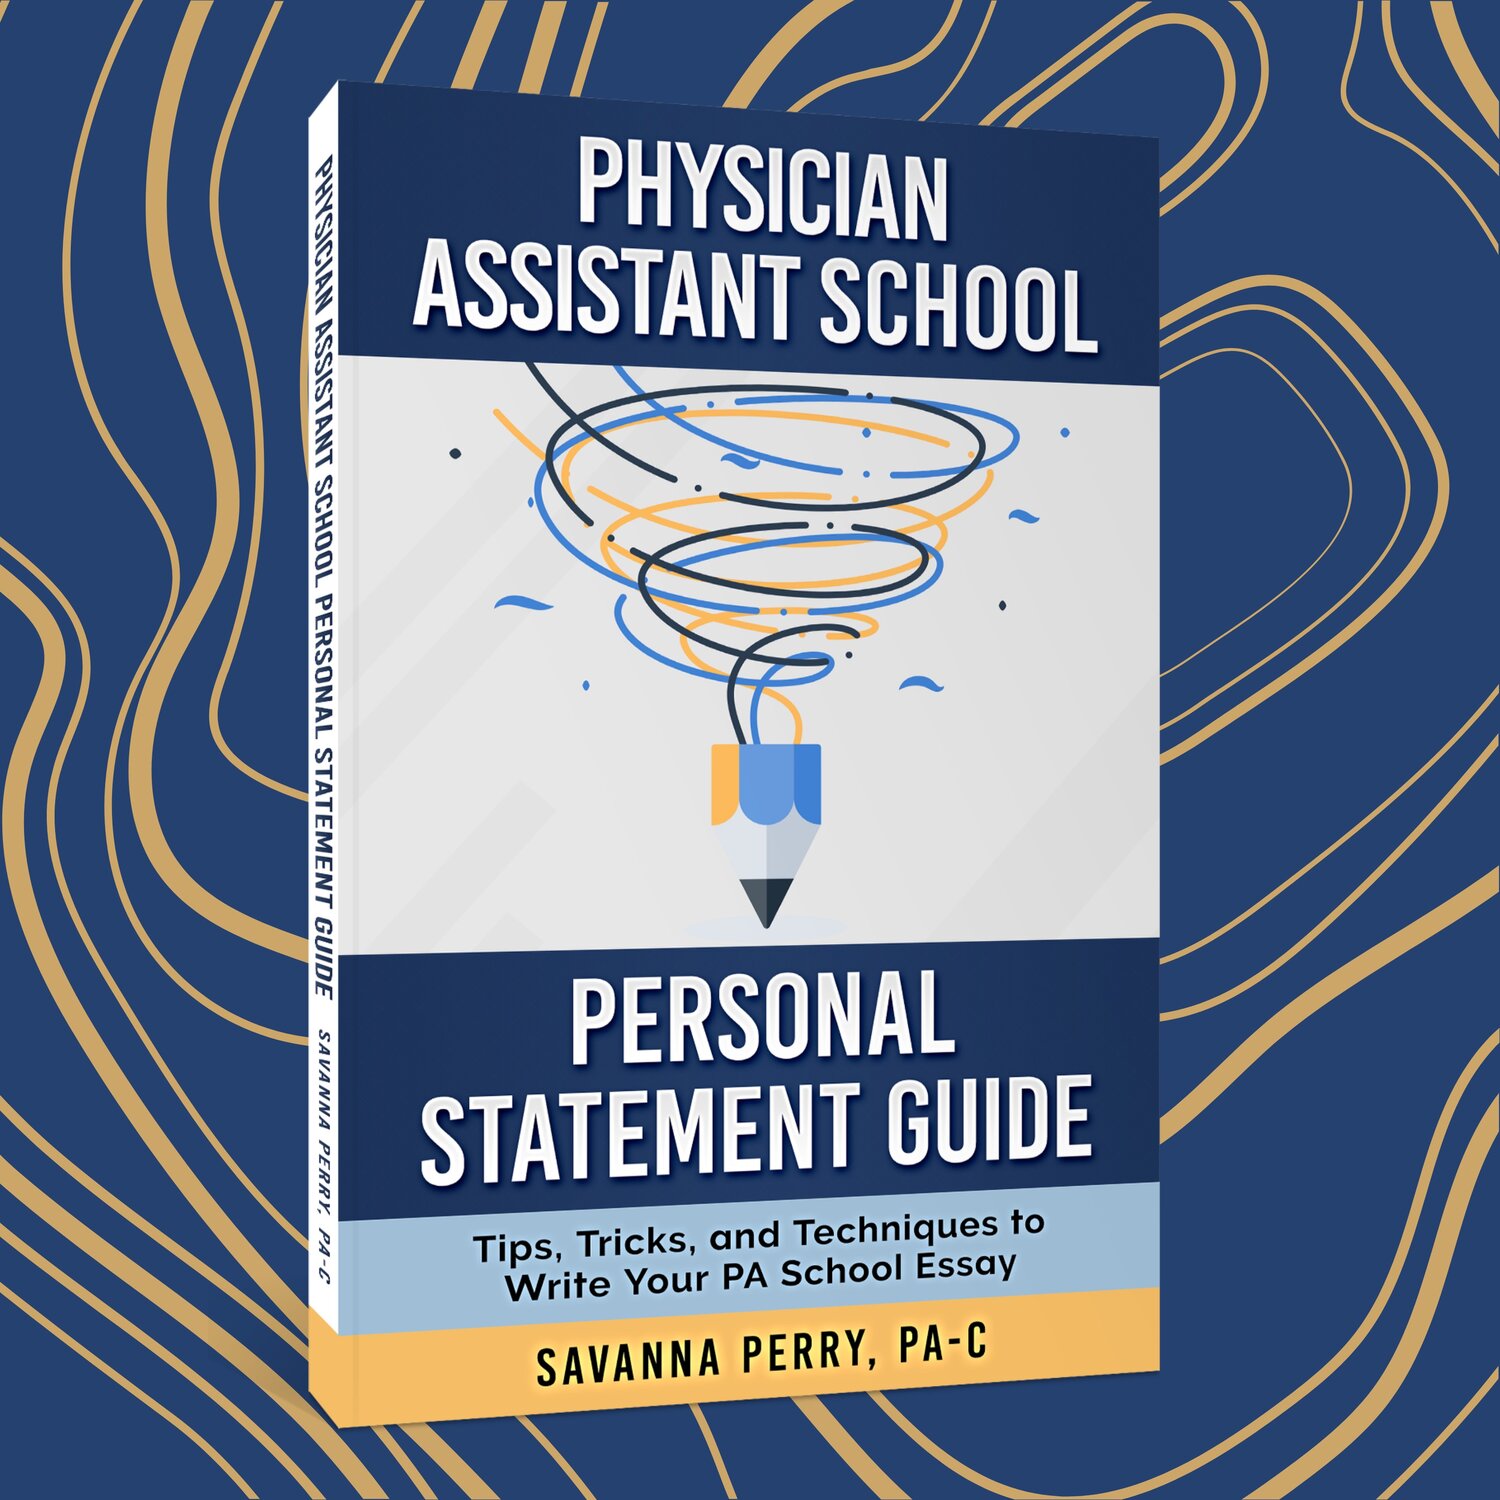 Physician Assistant School Personal Statement Guide — The PA